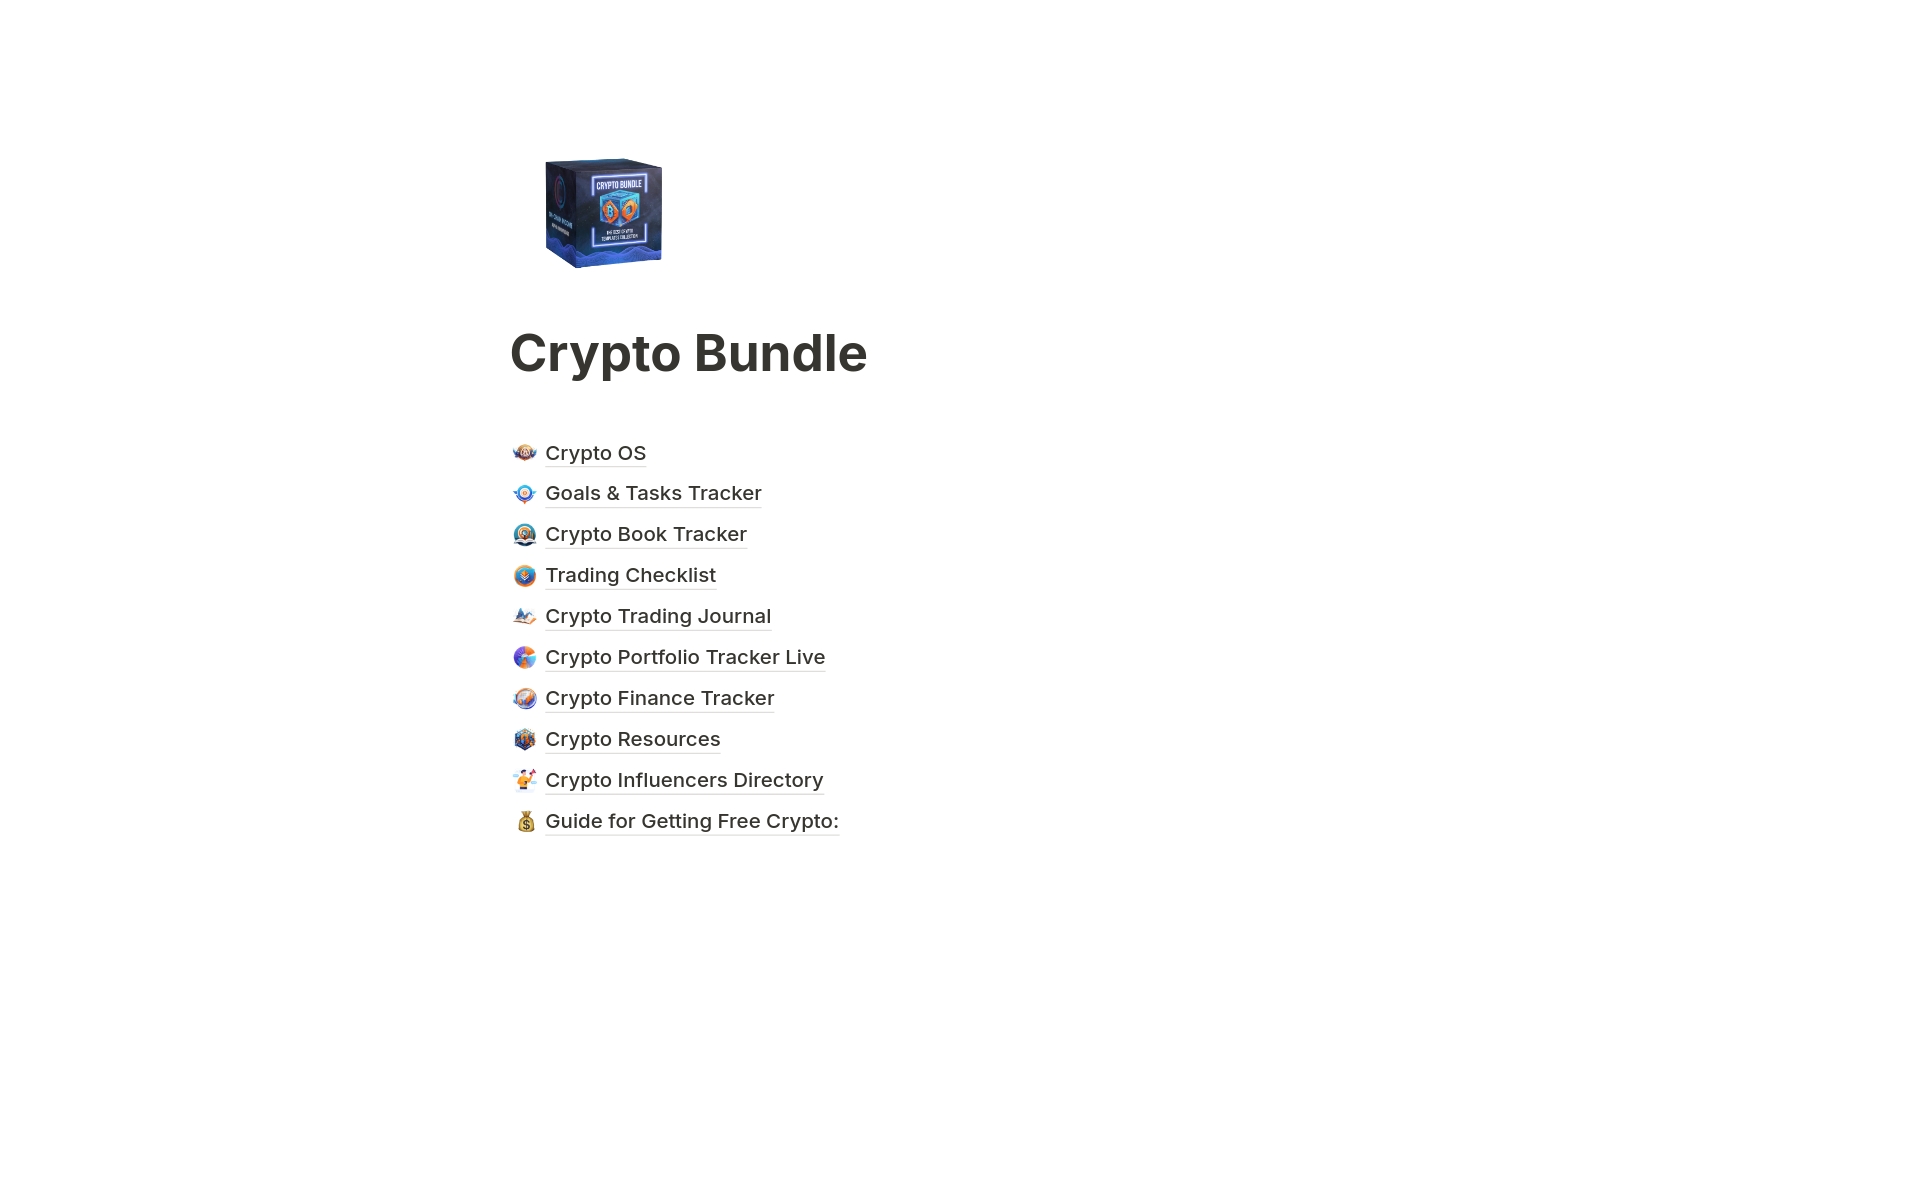 Power up your crypto journey with our comprehensive template bundle. This bundle contains multiple templates inside, saving you time and effort building our own.